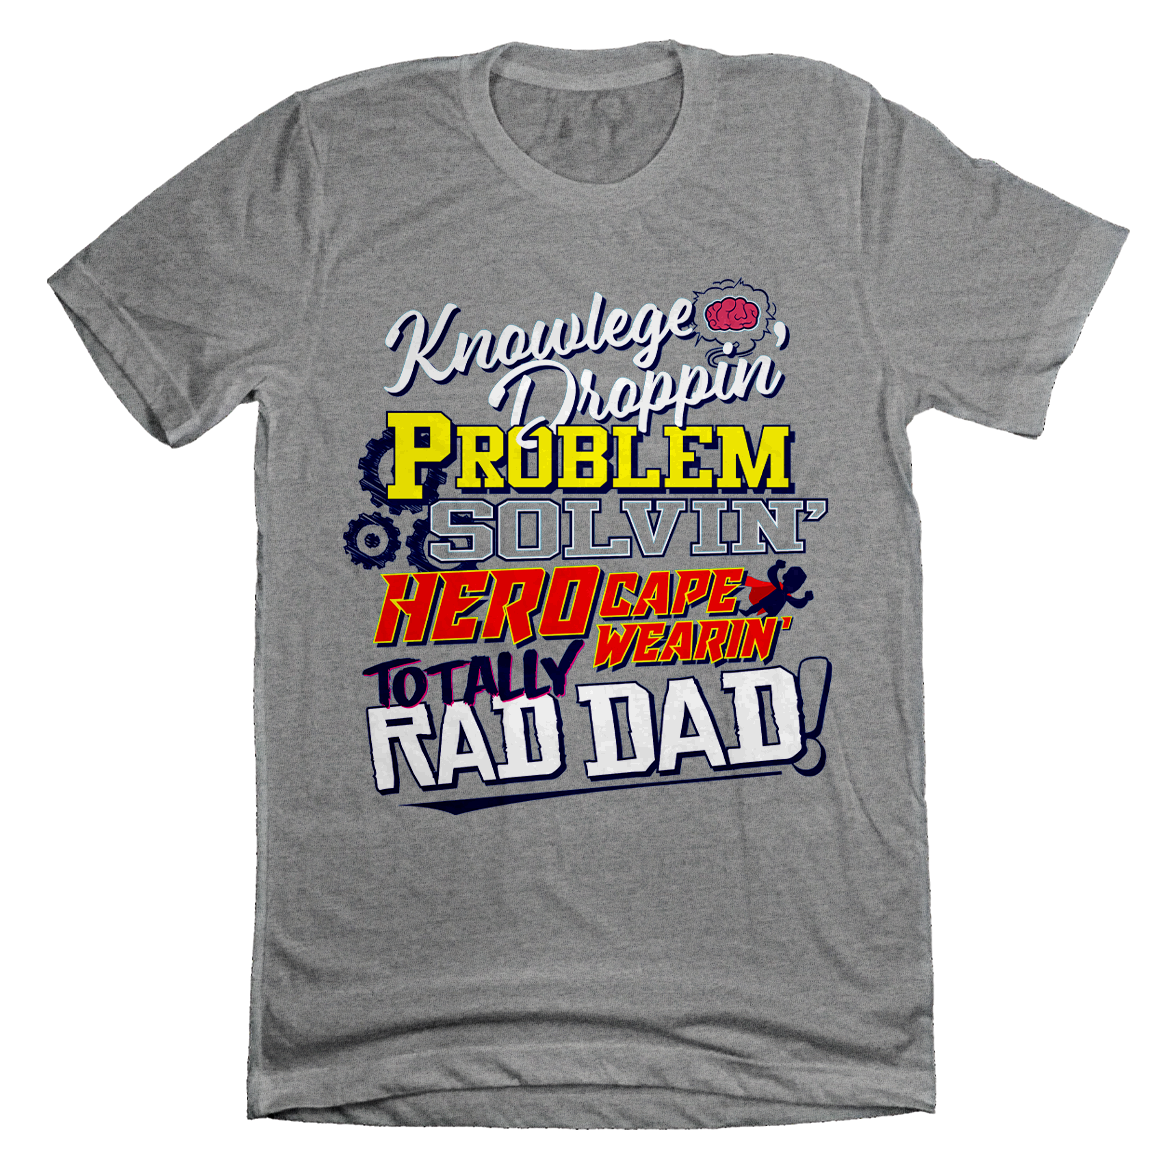 Knowledge Droppin' Totally Rad Dad - Cincy Shirts